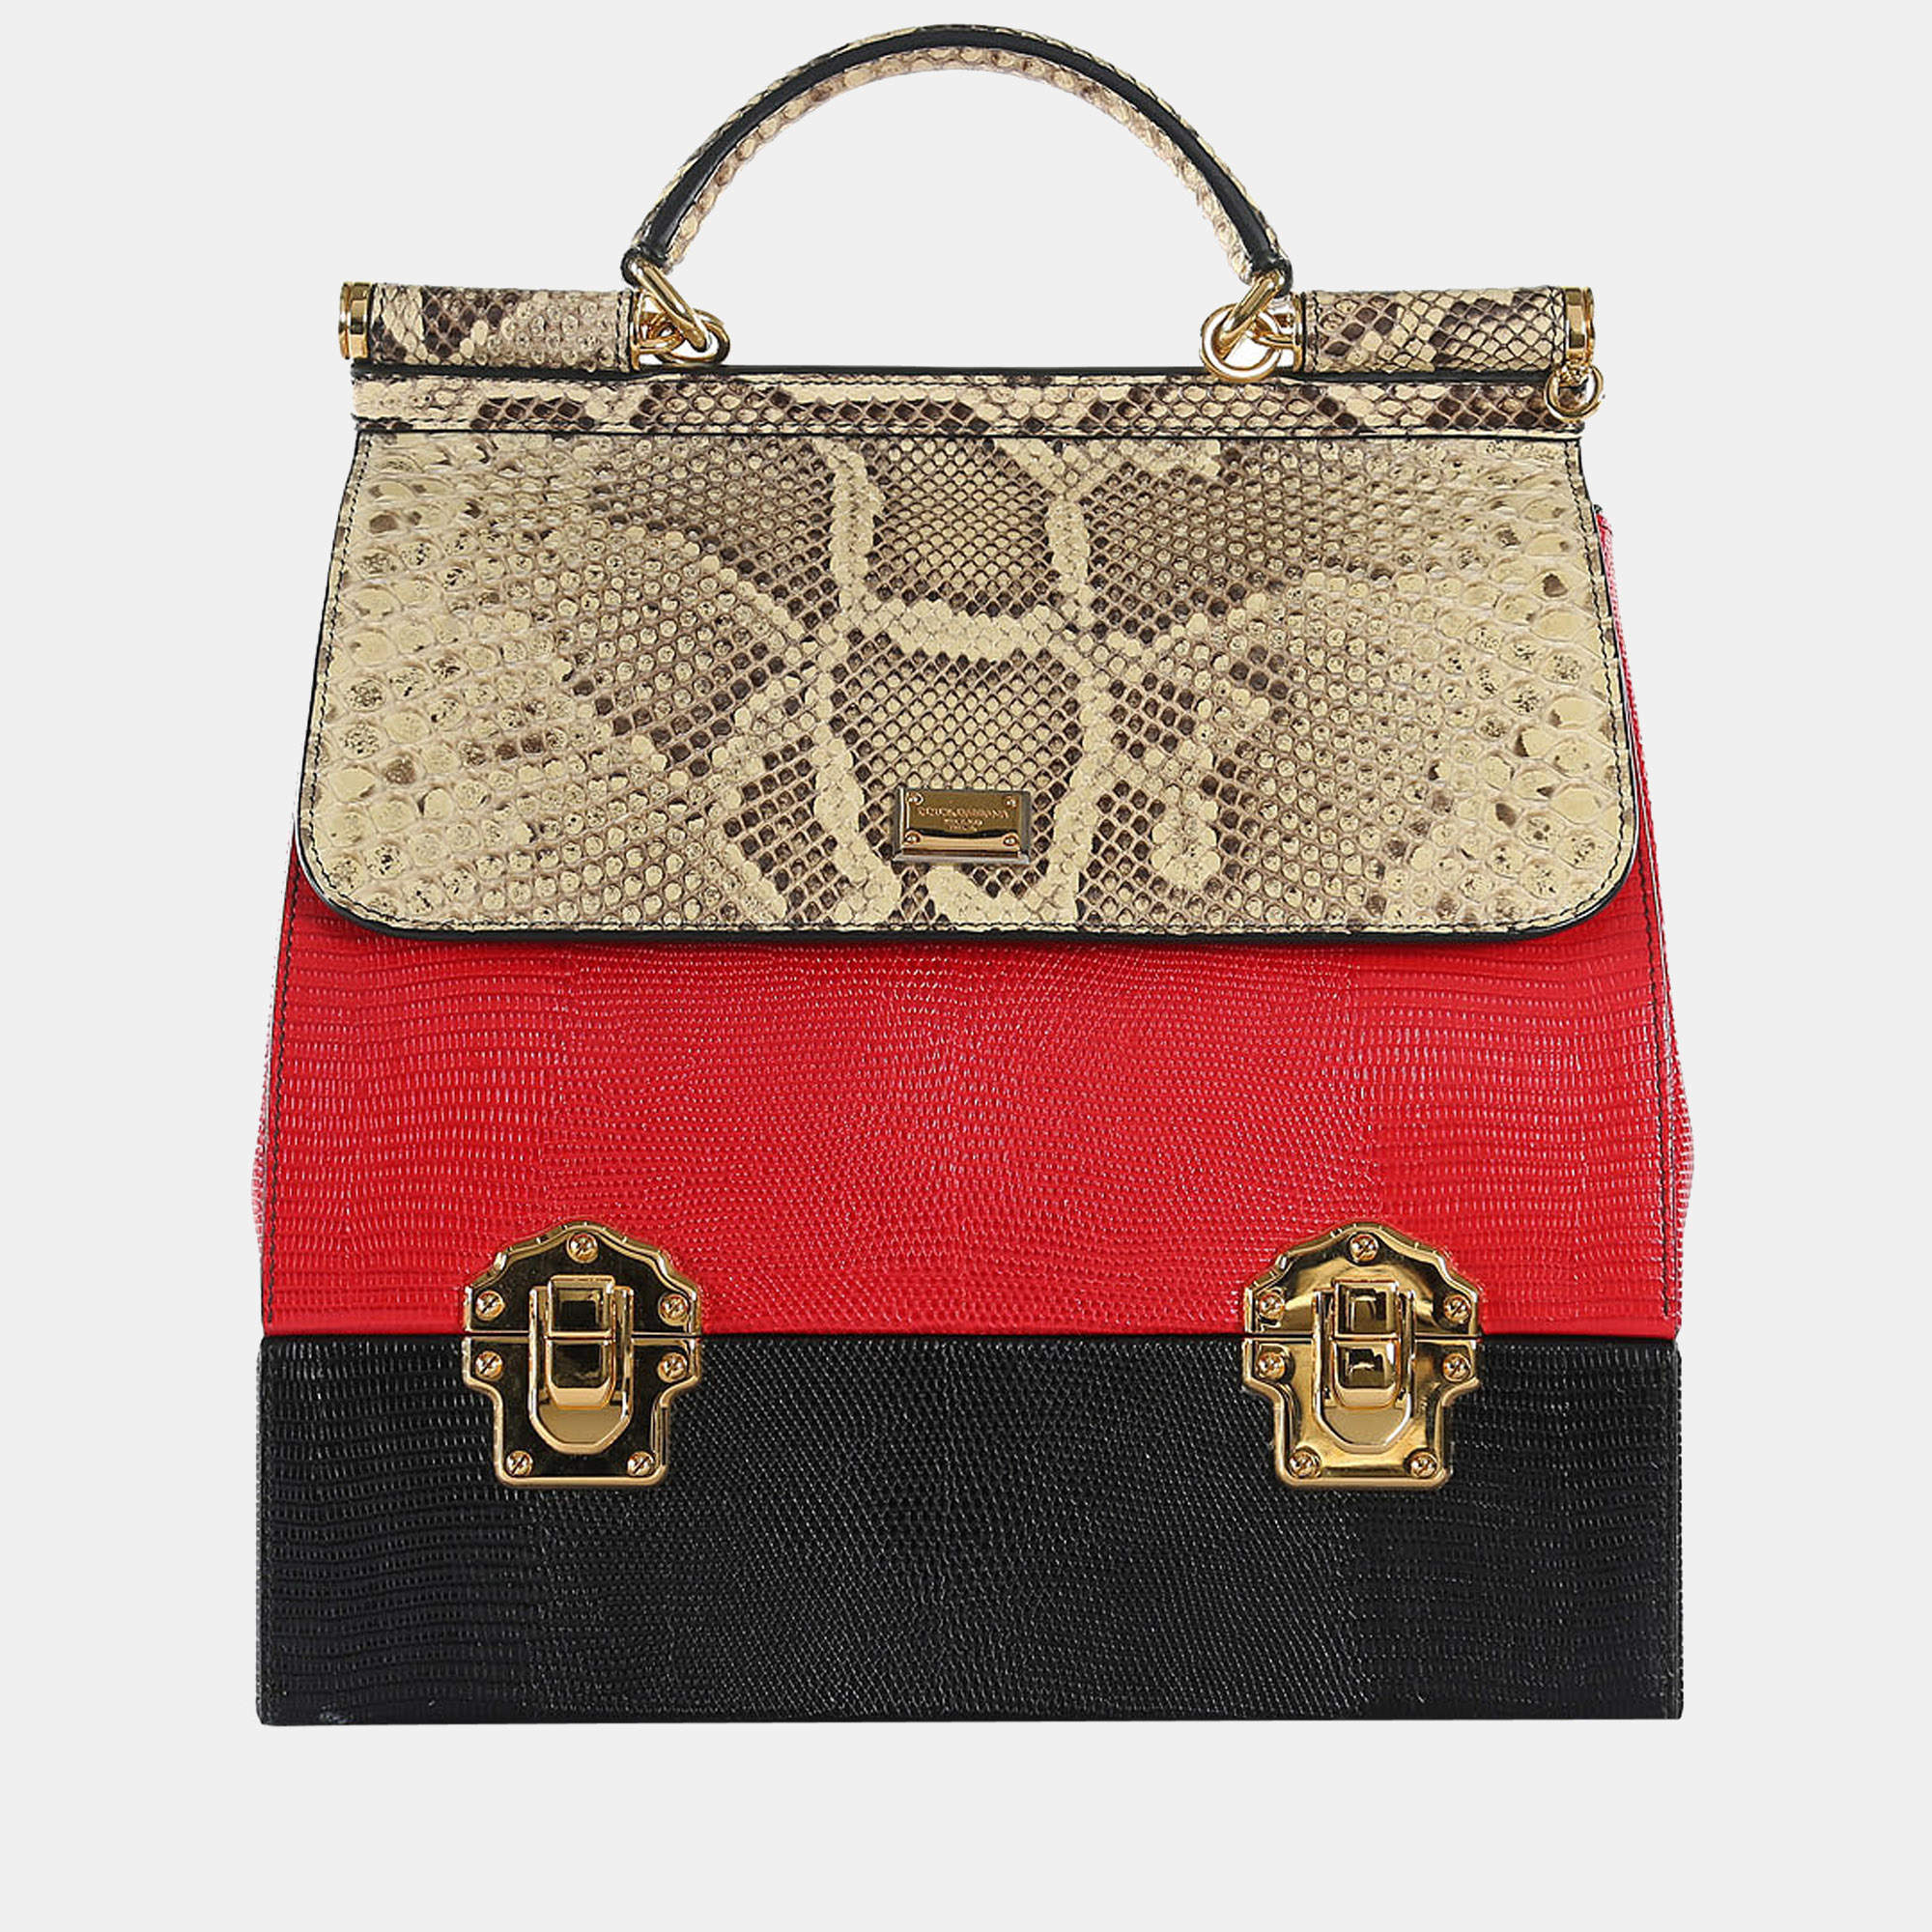 Dolce & Gabbana Red Leather and Snakeskin Medium Miss Sicily Top Handle Bag  Dolce & Gabbana